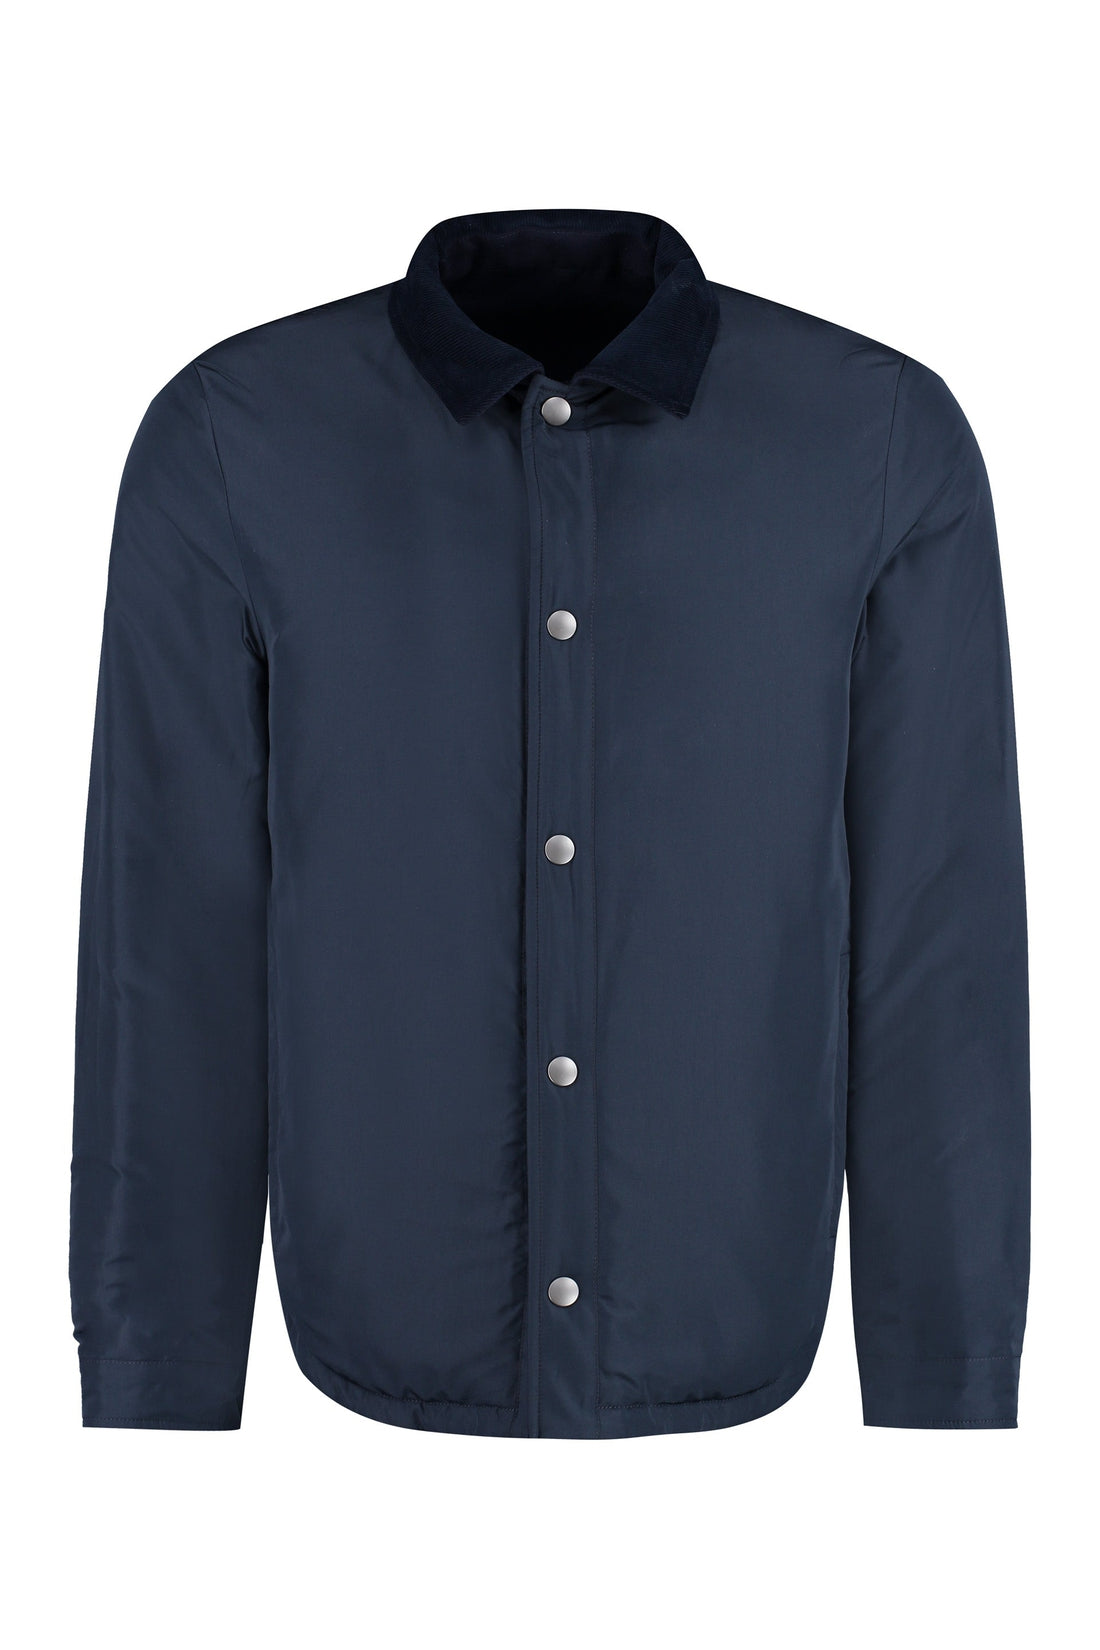 Canali-OUTLET-SALE-Wool overshirt-ARCHIVIST